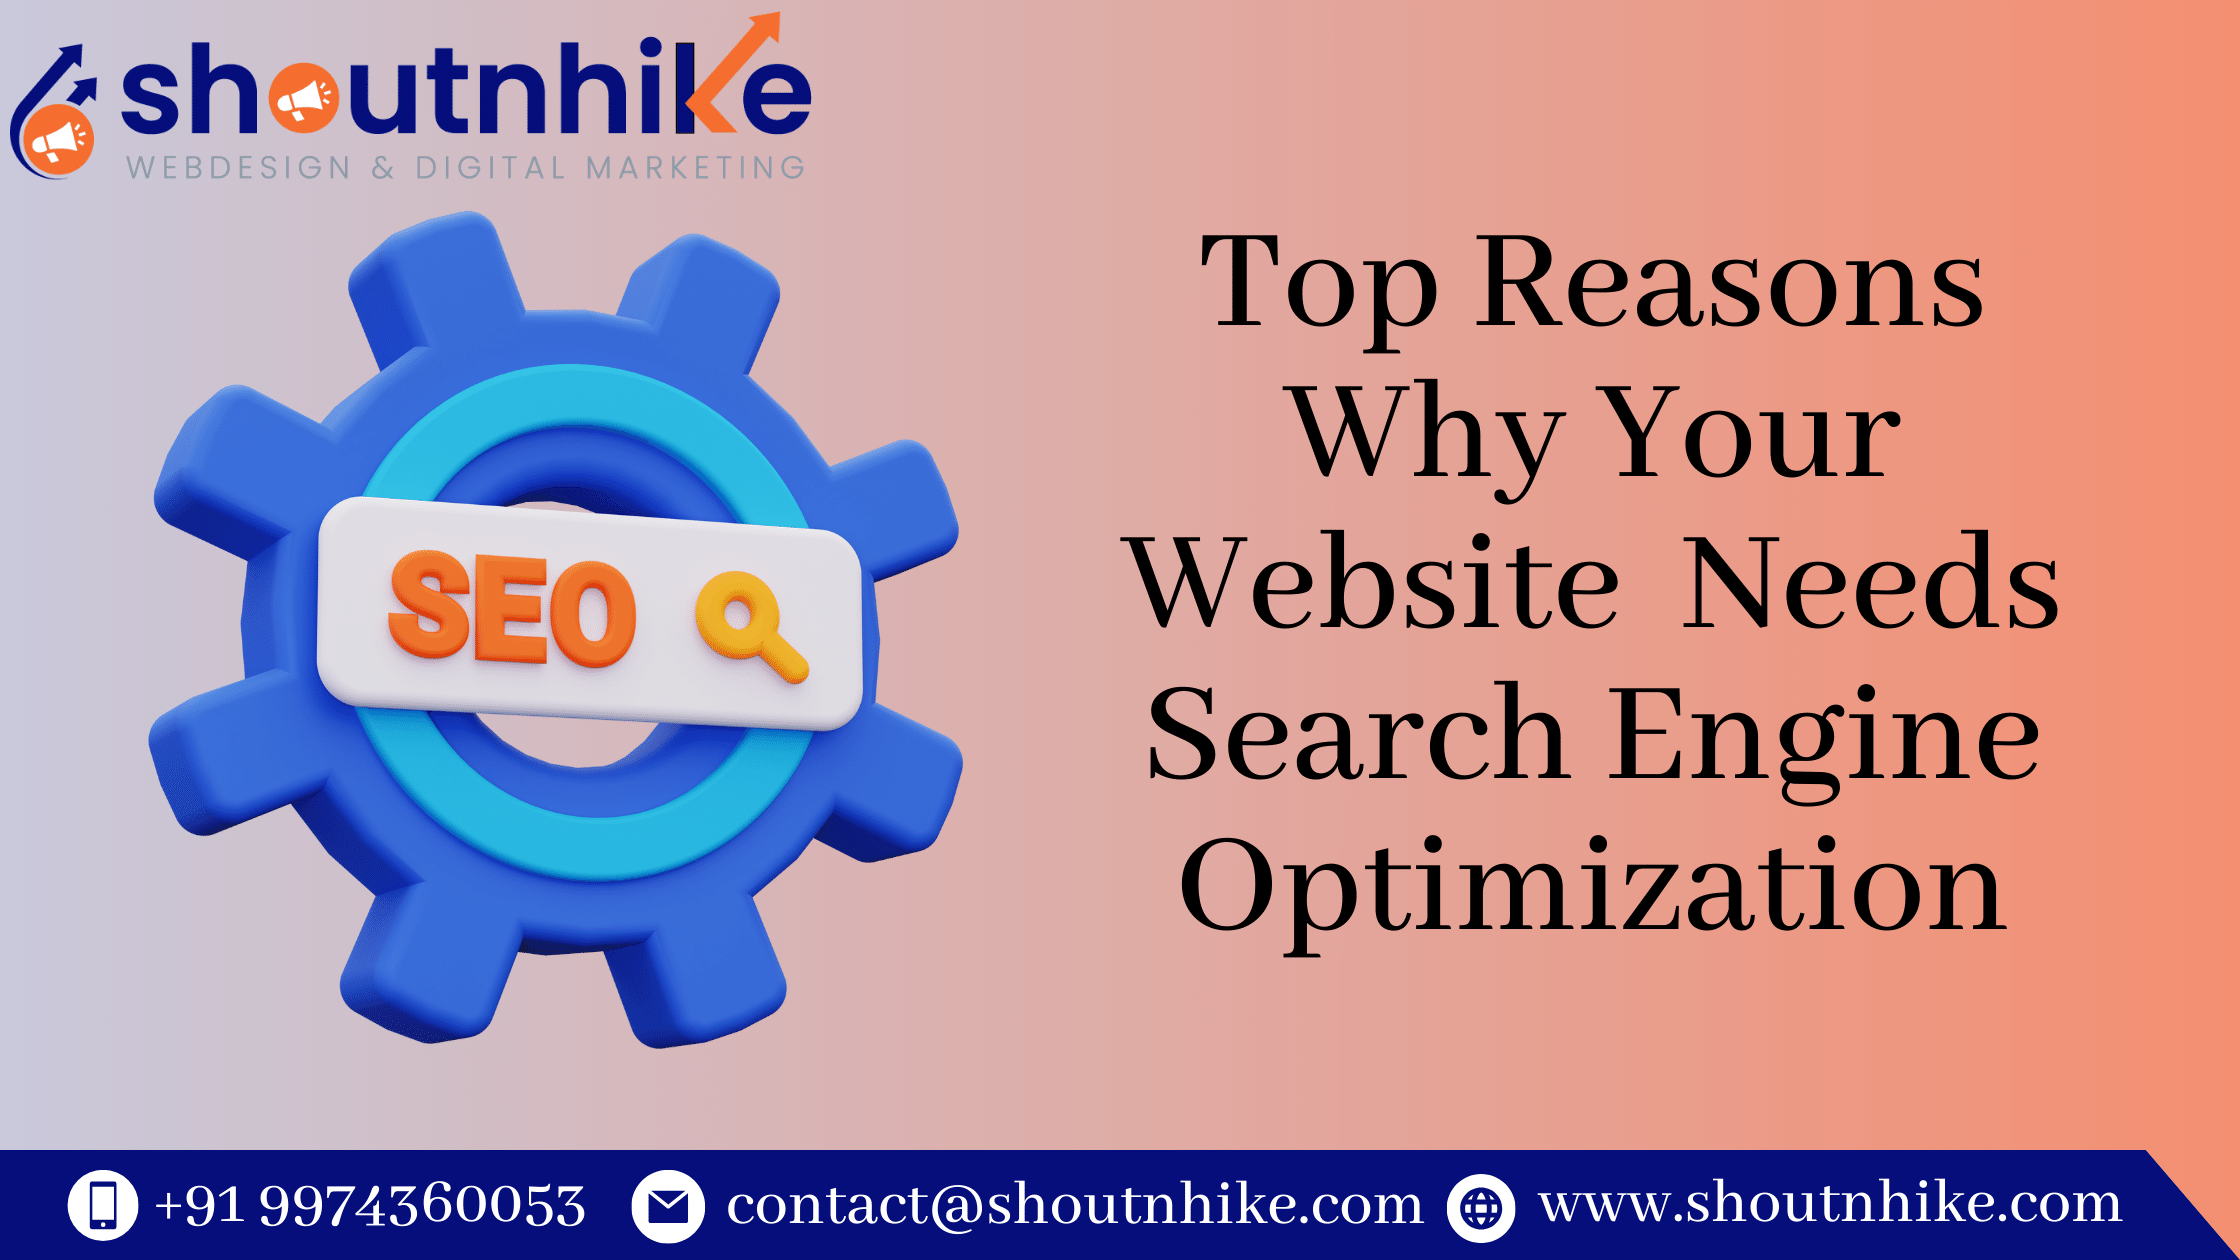 Top Reasons Why Your Website Needs Search Engine Optimization